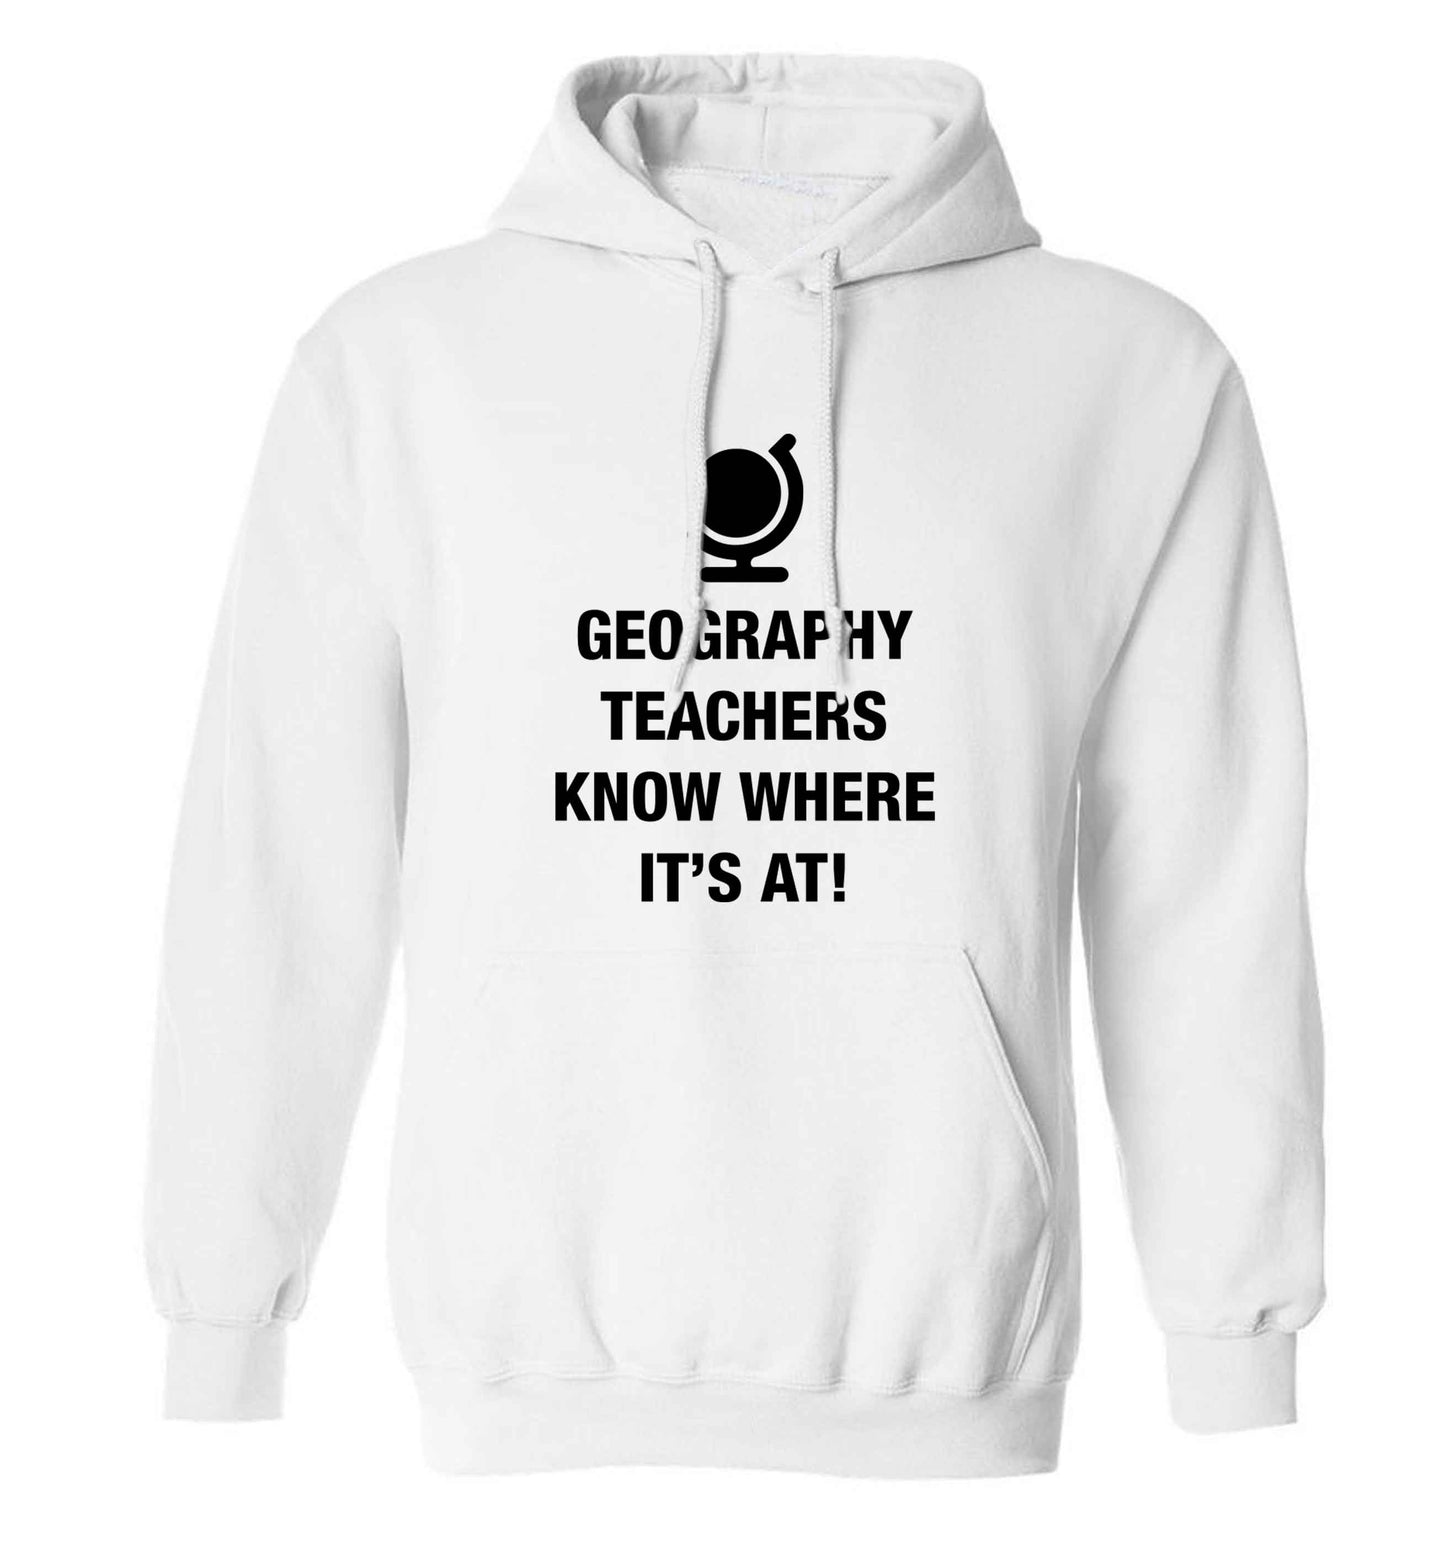 Geography teachers know where it's at adults unisex white hoodie 2XL